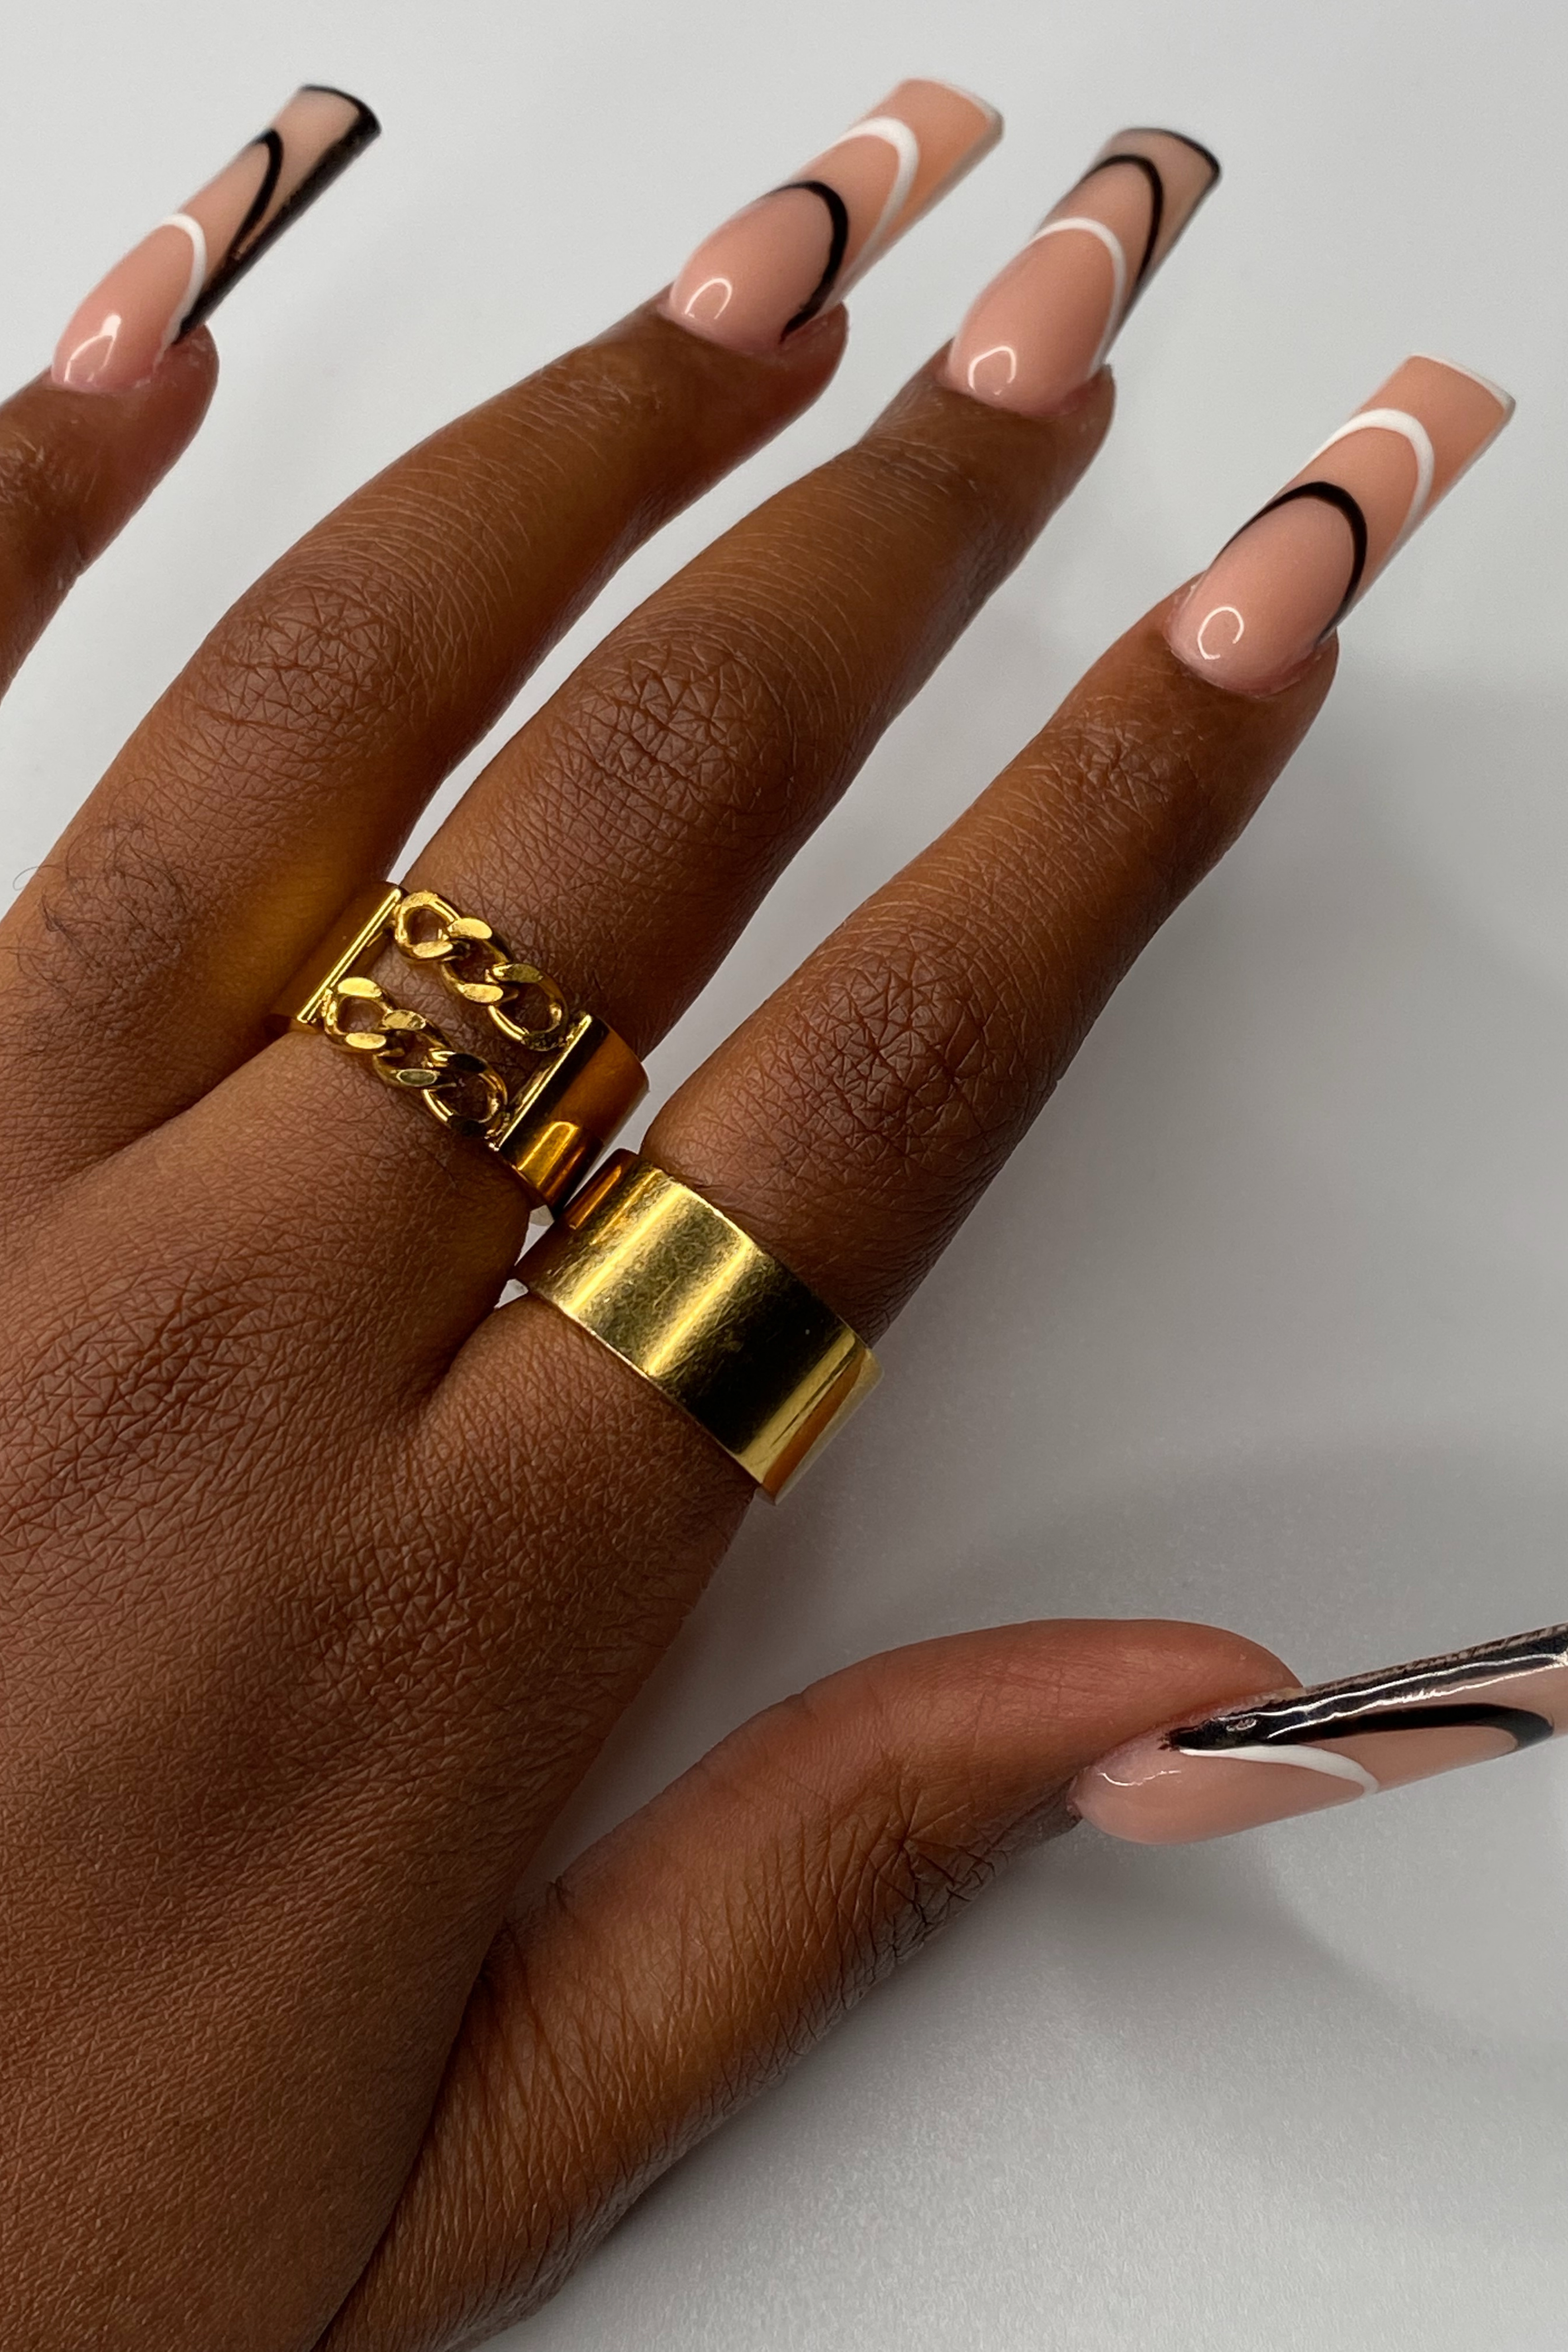 18k gold stainless steel rings worn on the index and middle finger. Double Band Stackable Ring (Upgraded) by E's Element.